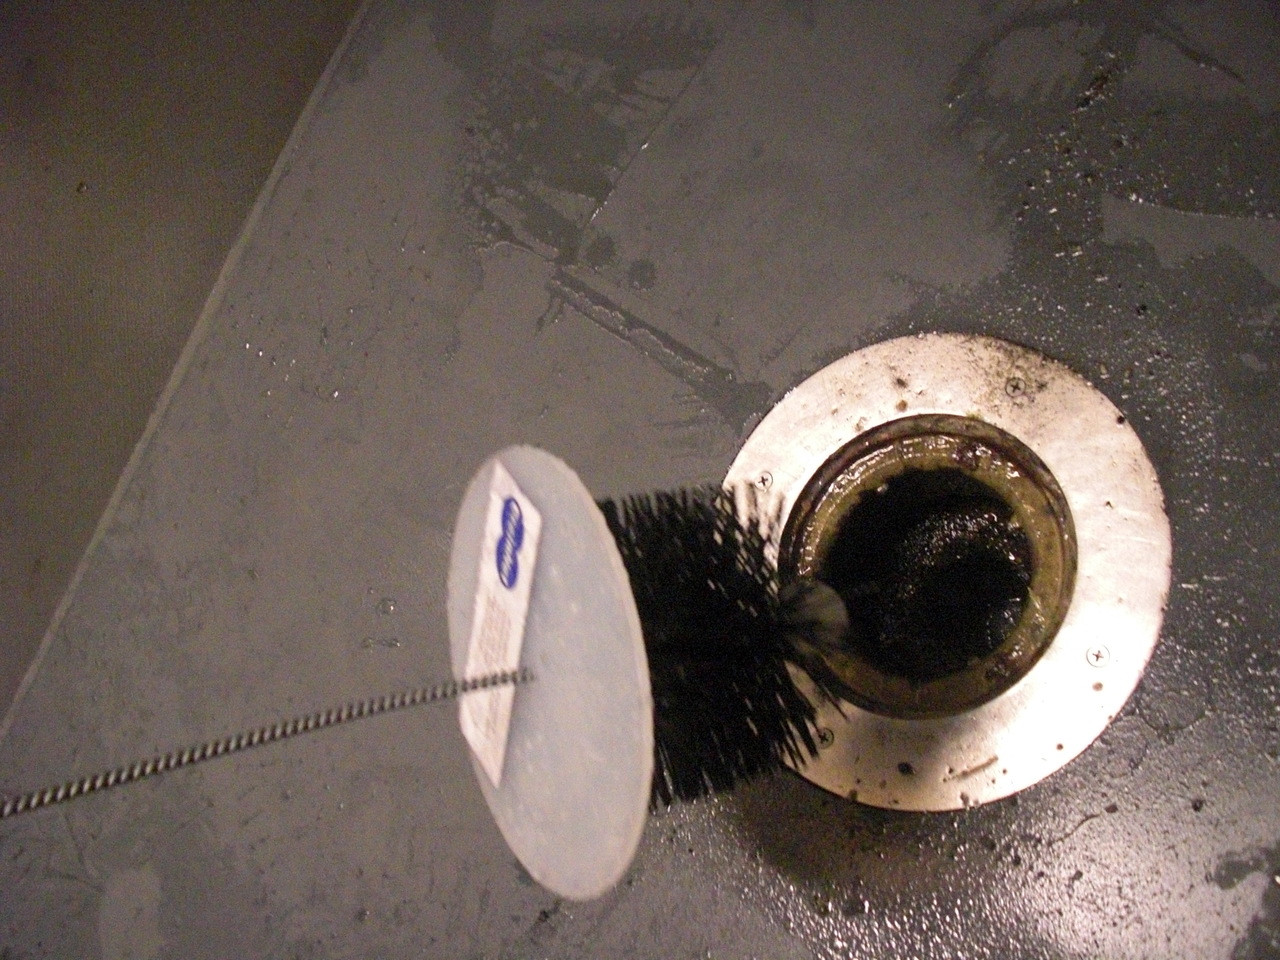 Splash Guard™ to ensure contaminates do not escape the drain while cleaning